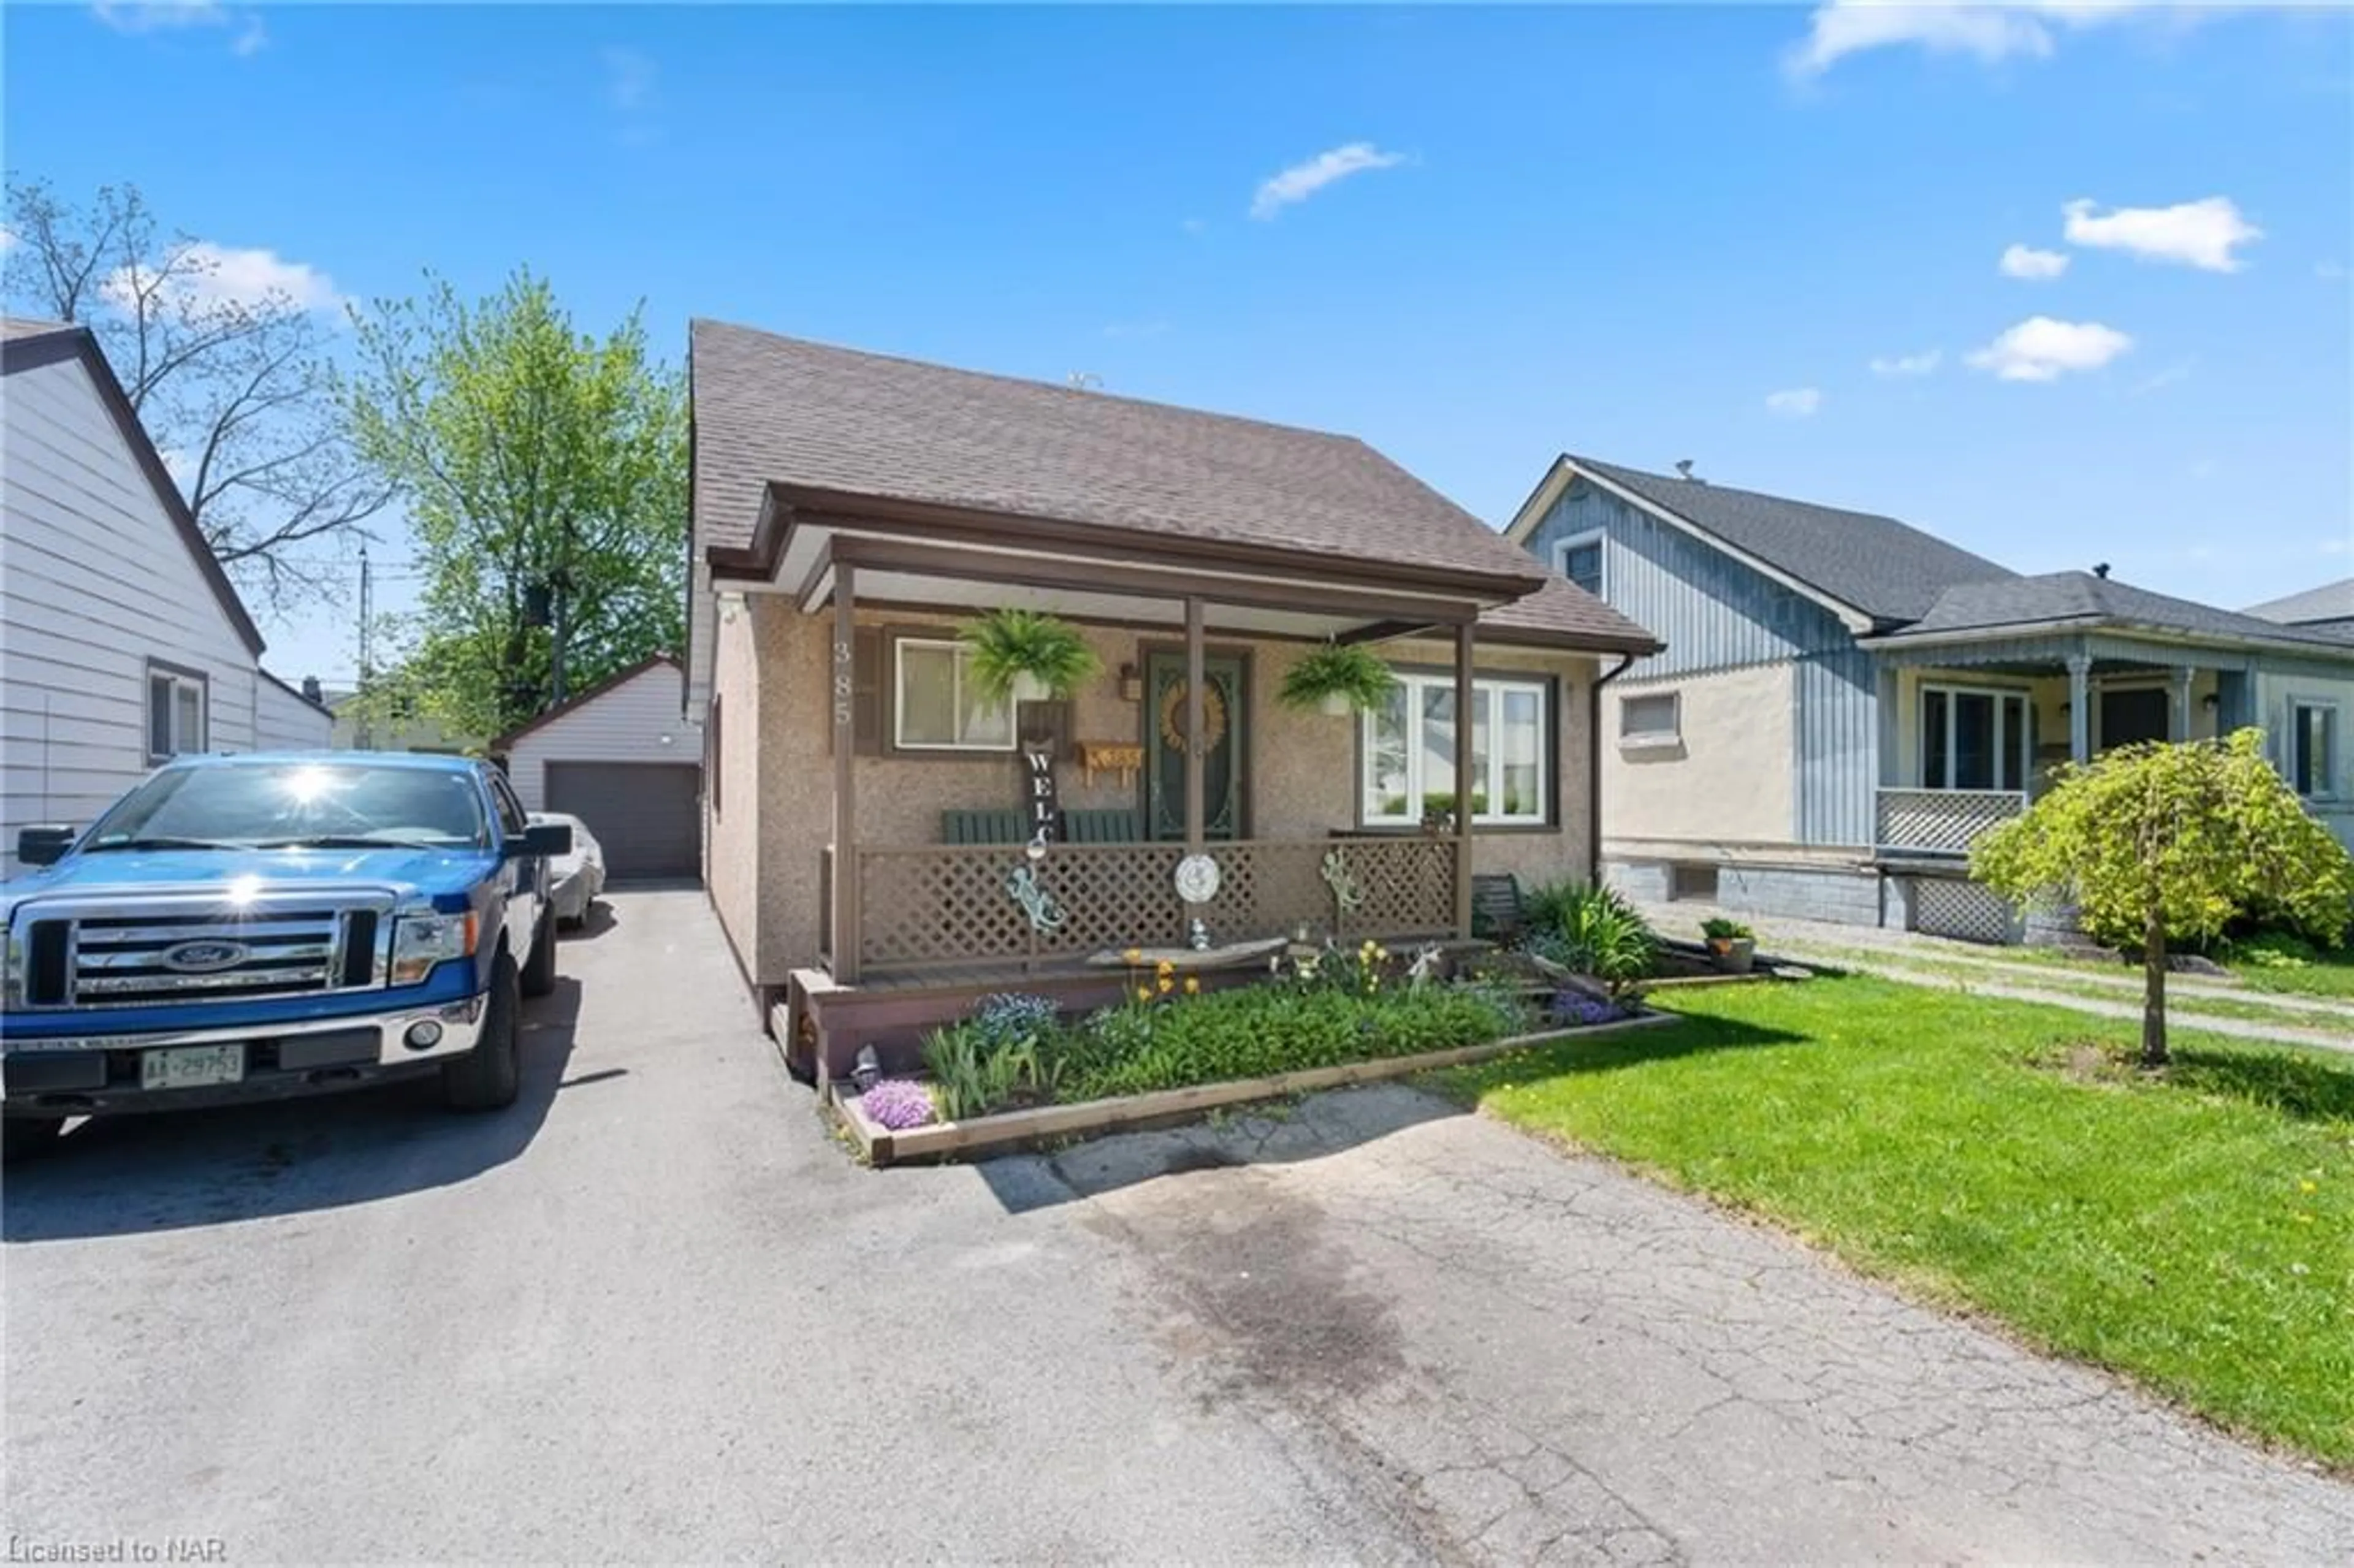 Frontside or backside of a home for 385 Hennepin Ave, Welland Ontario L3B 4T4